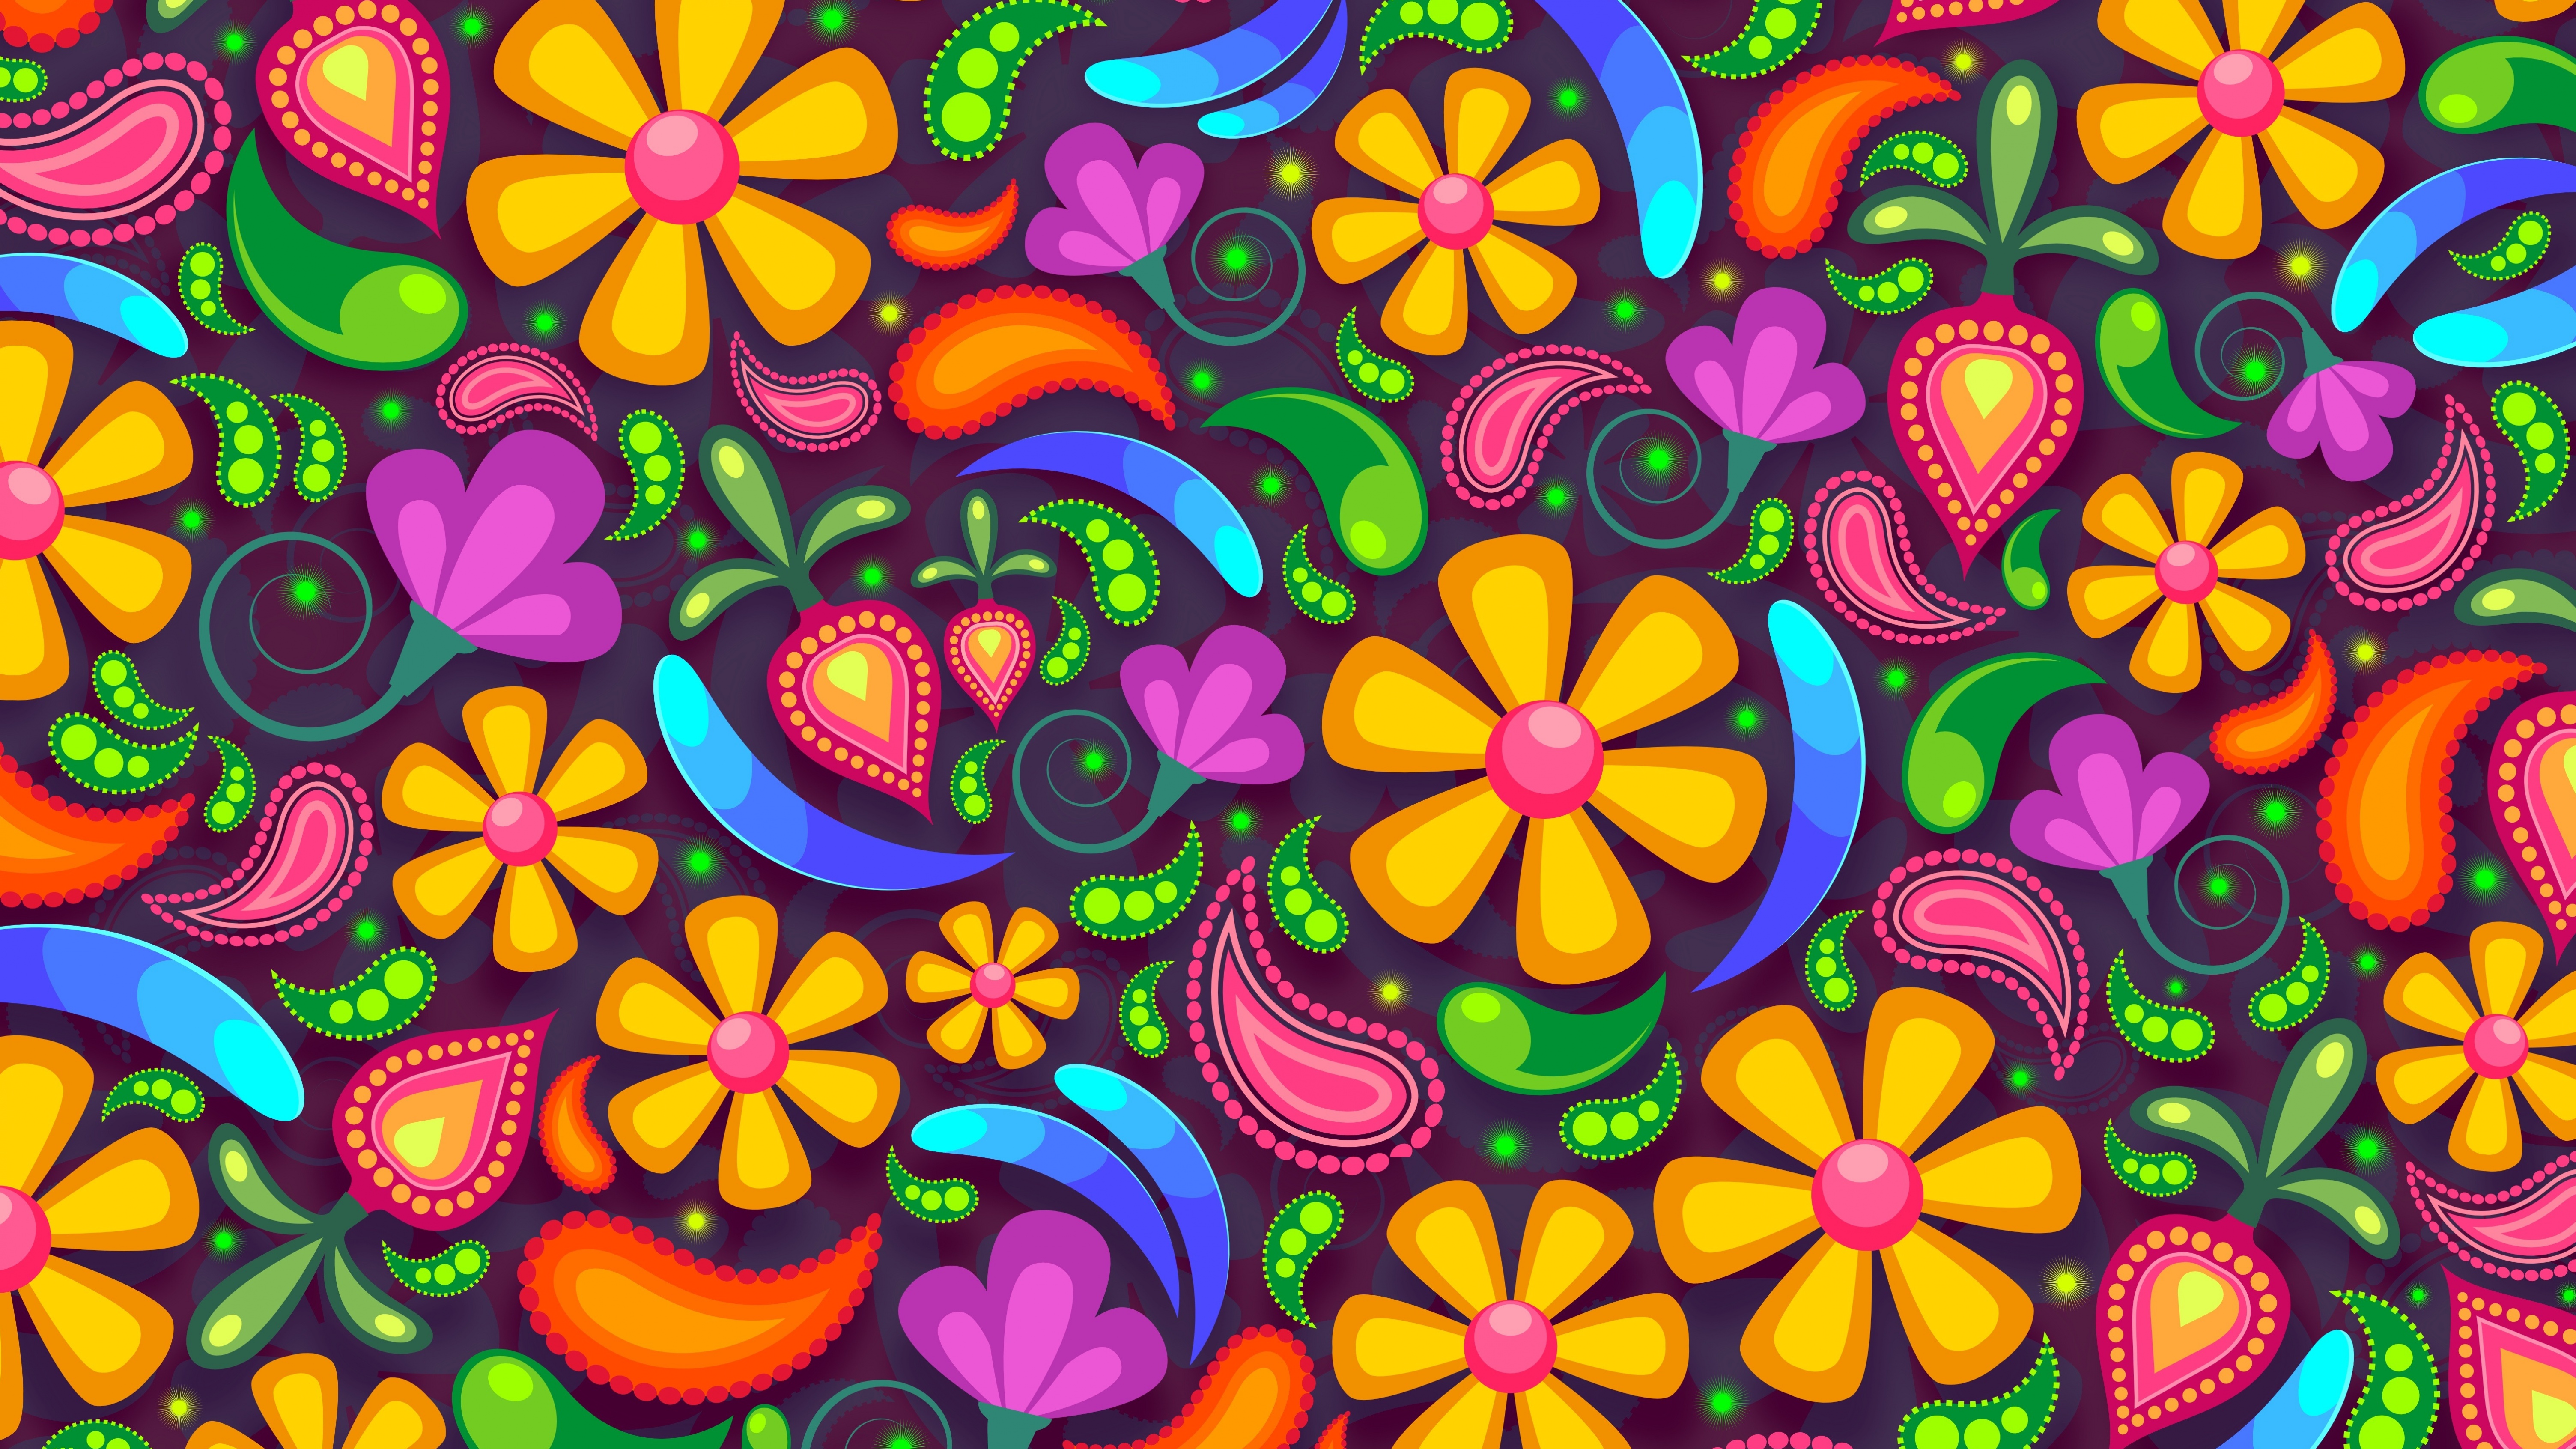 Floral designs Wallpaper 4K, Girly backgrounds, Abstract, #5688